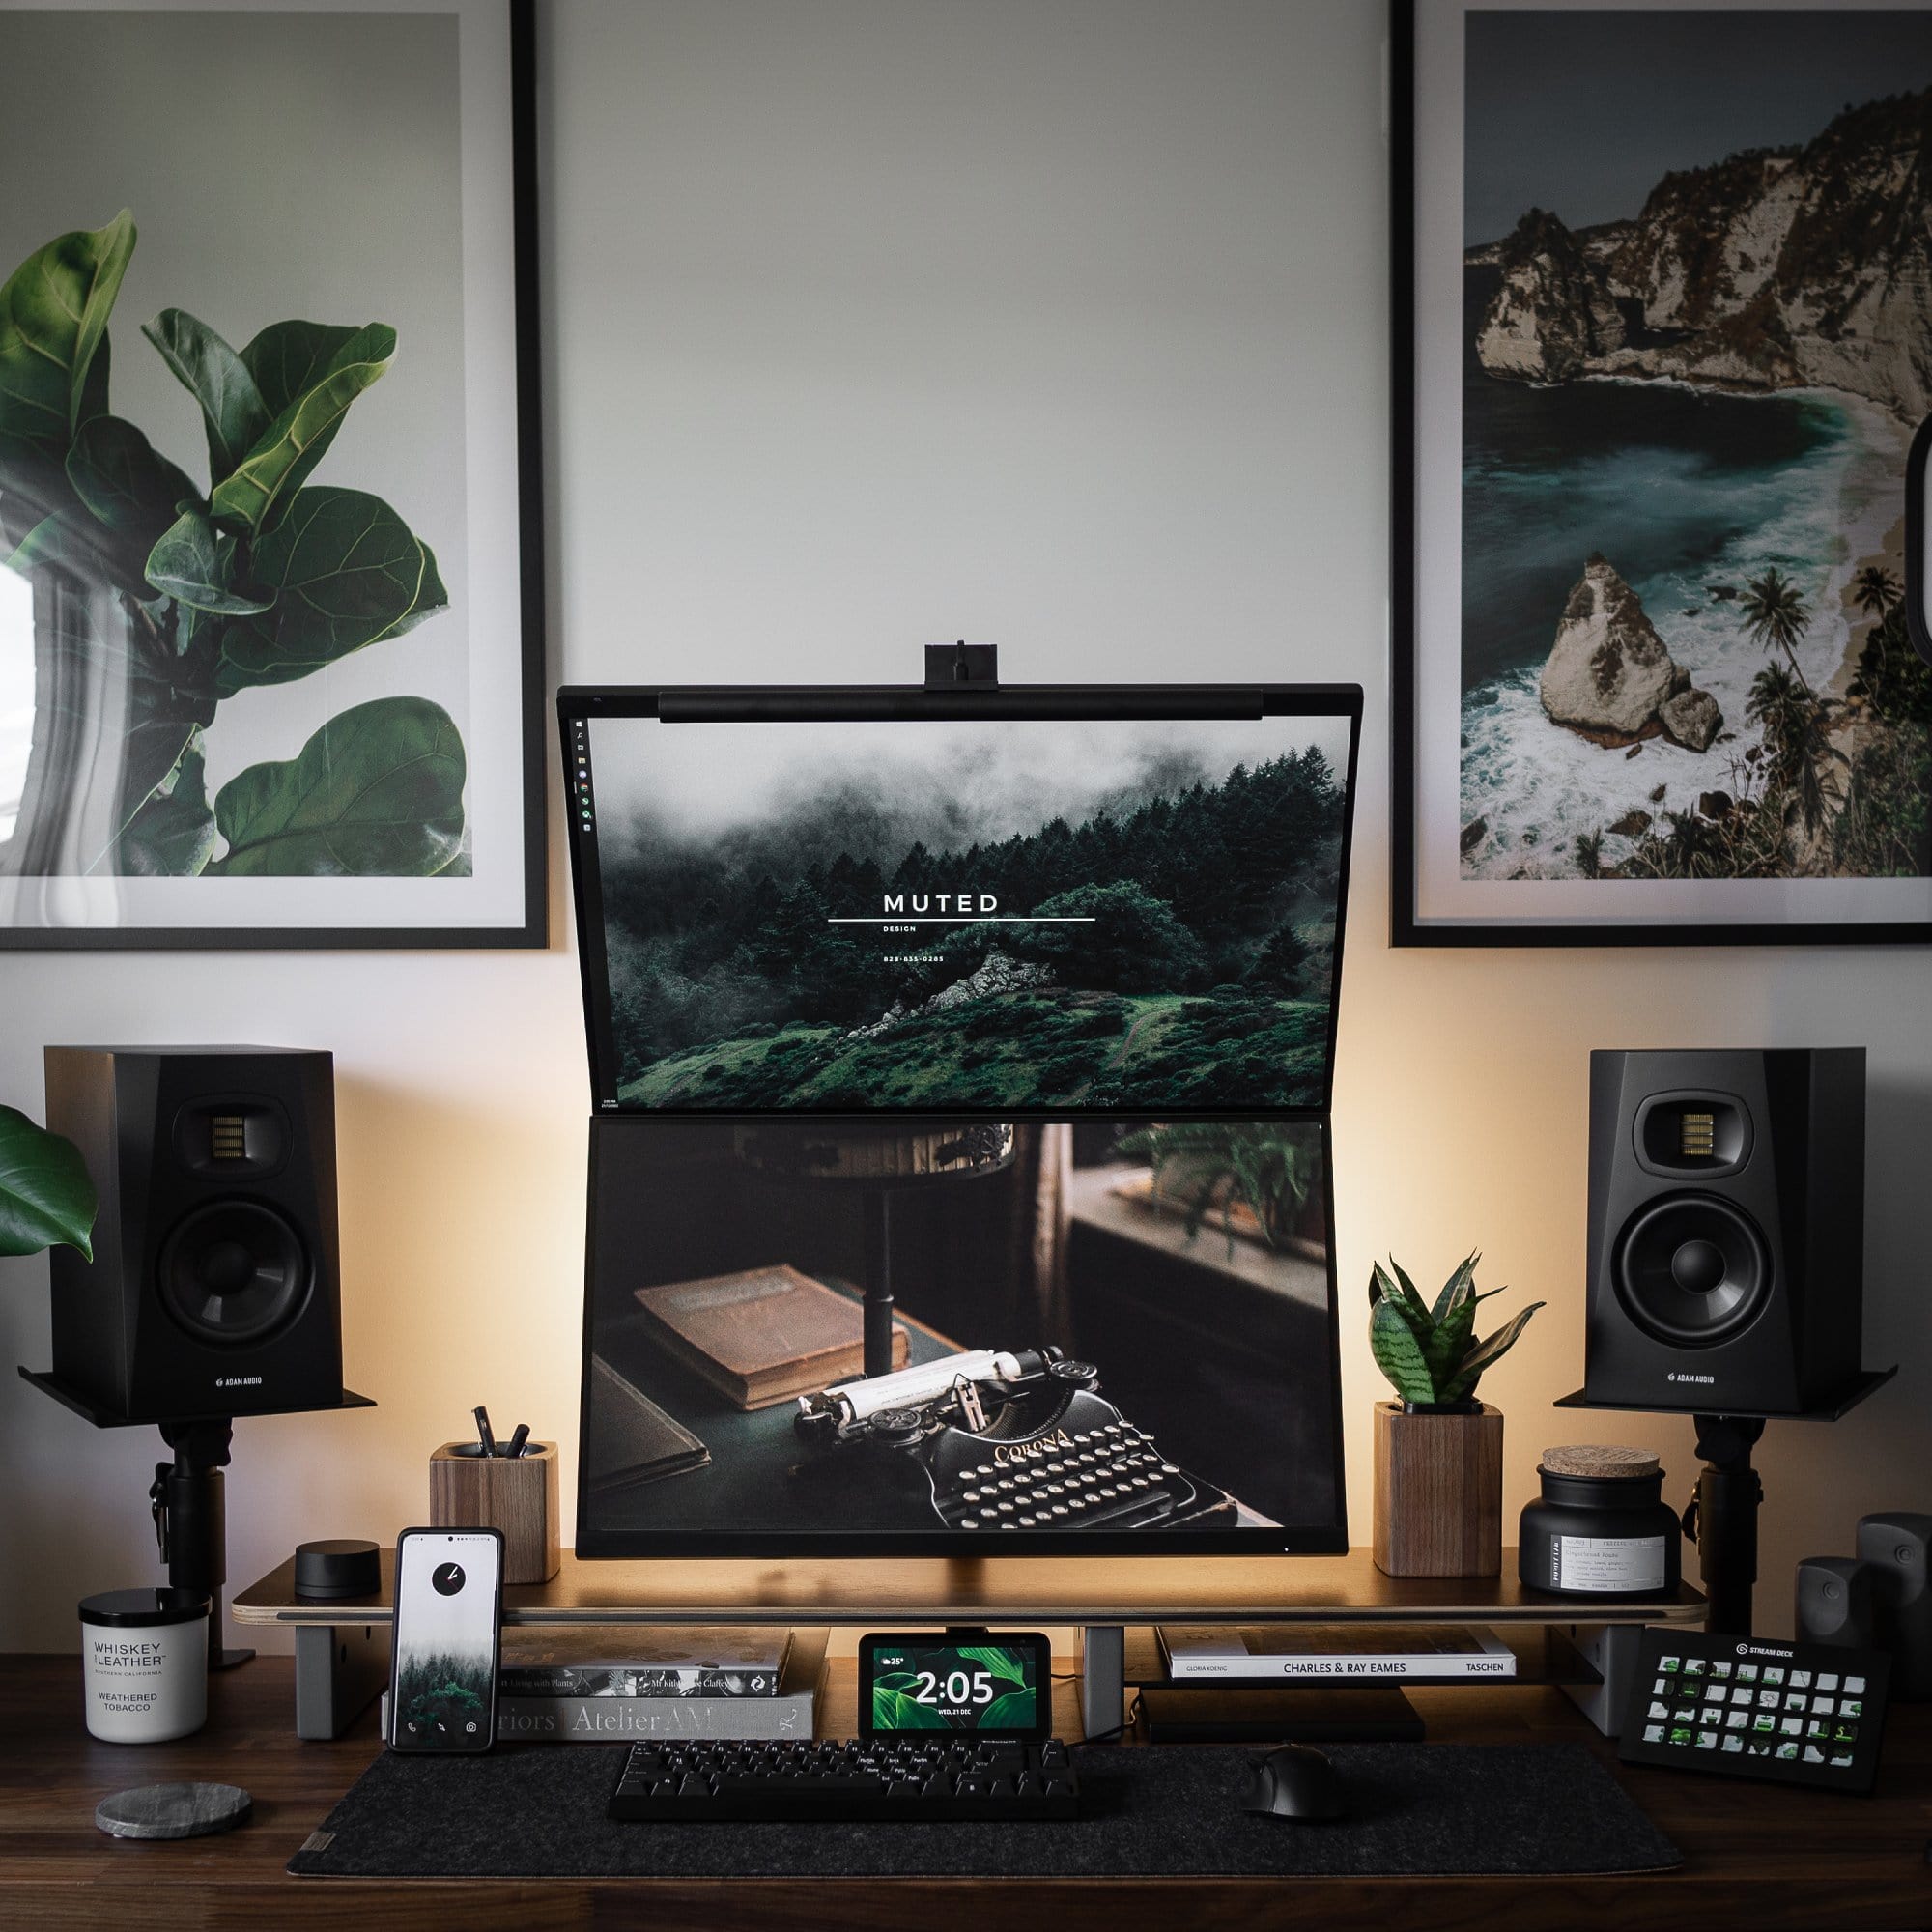 A calming and moody dual-screen home office setup with houseplants